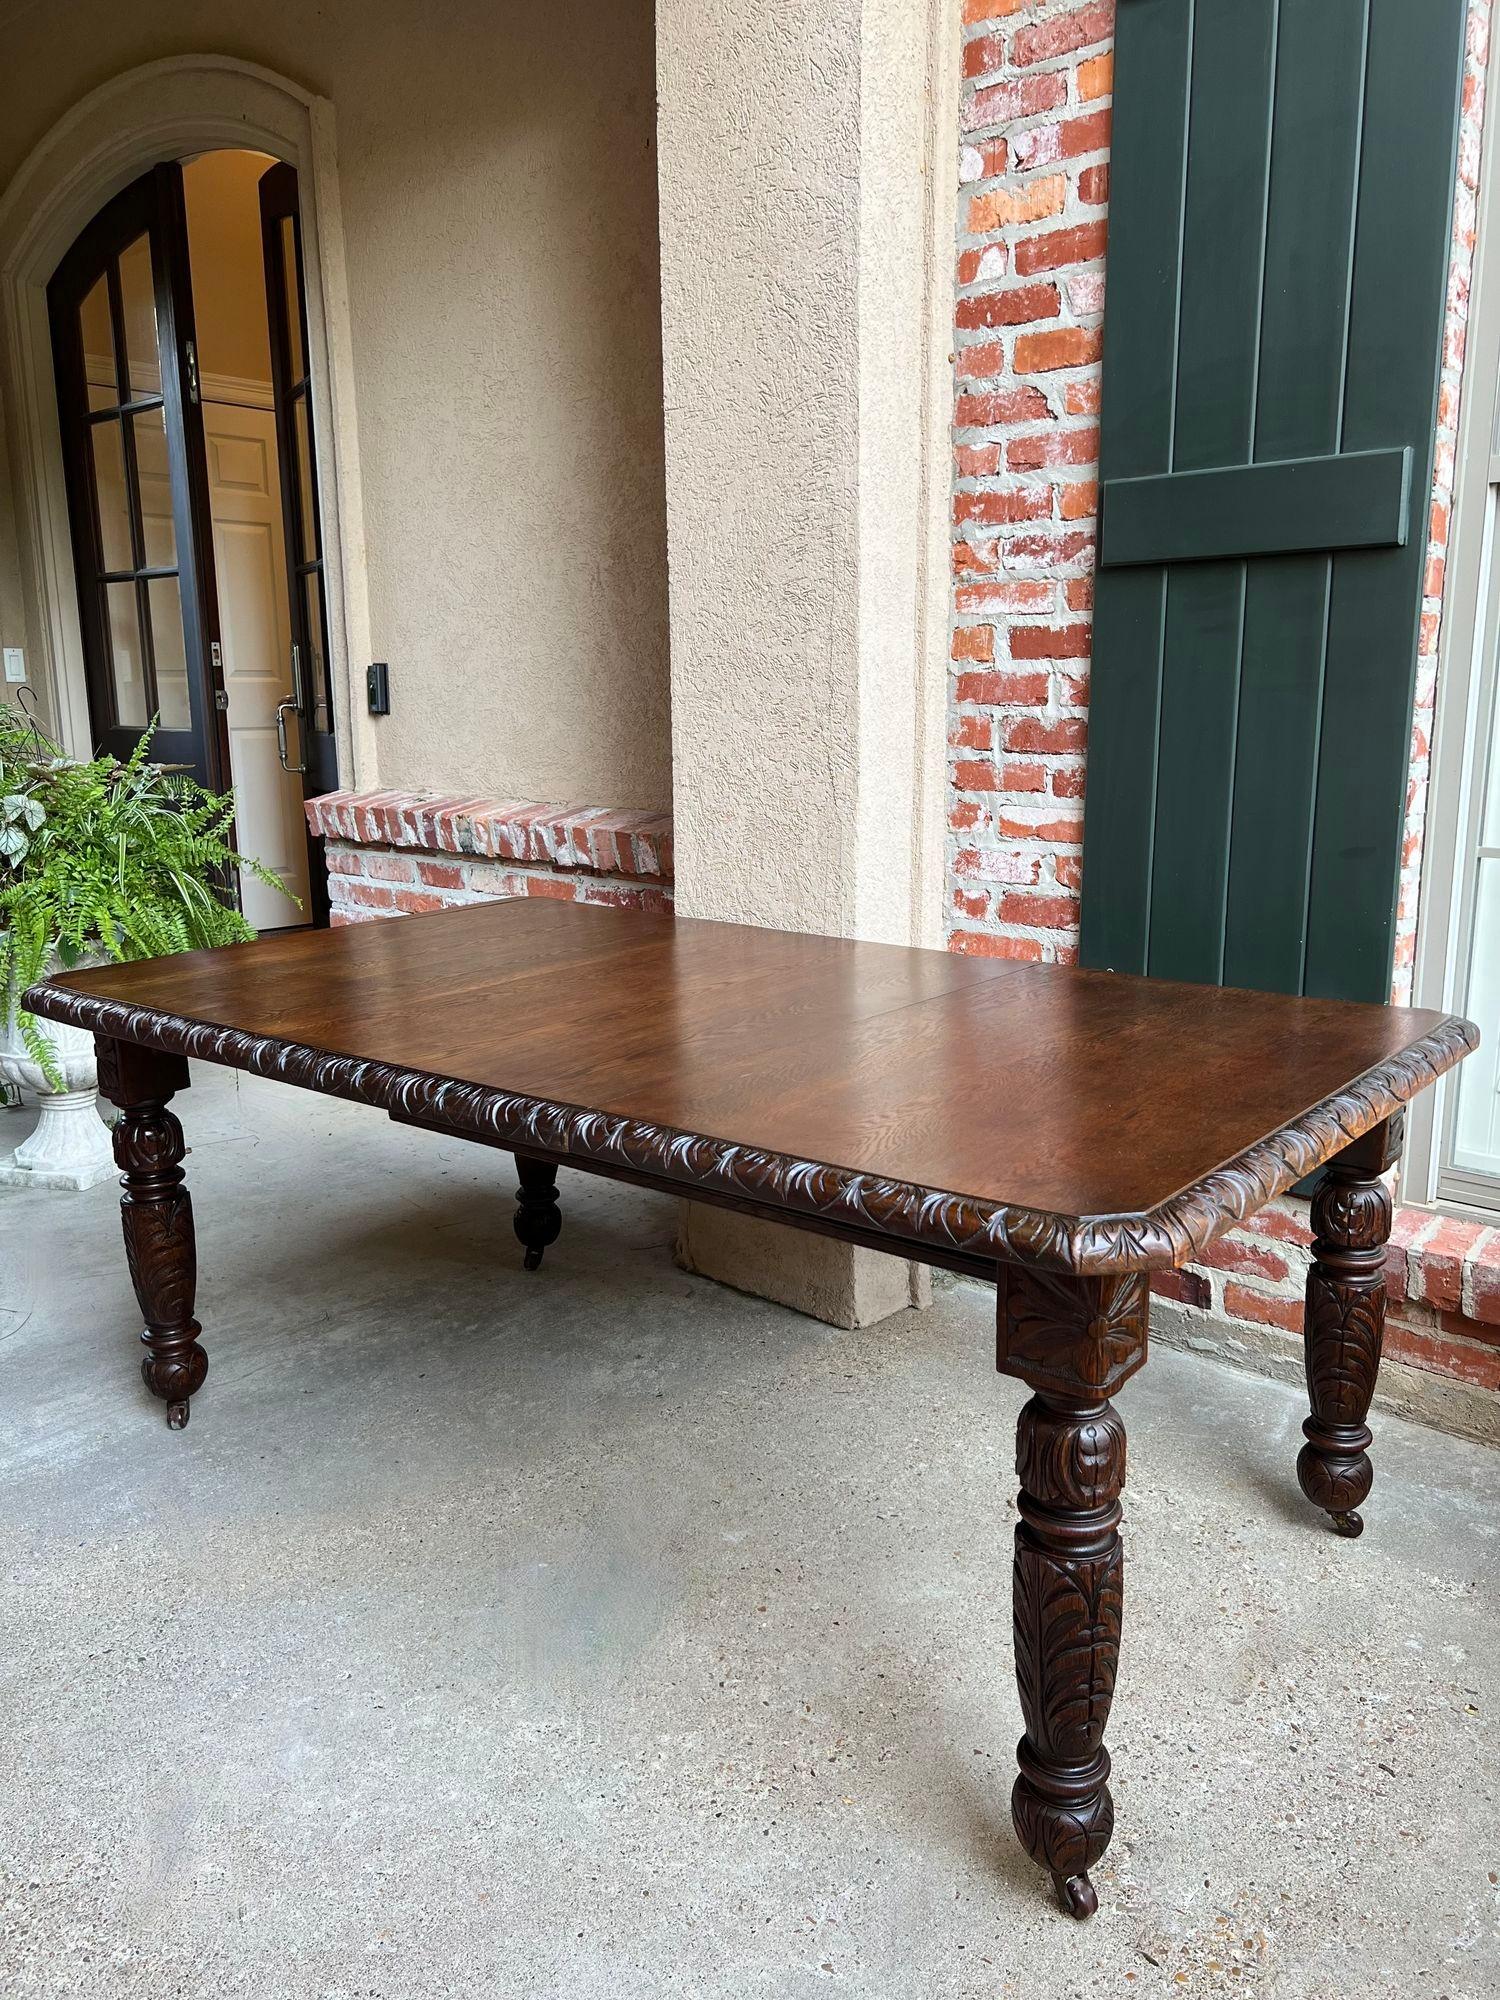 Antique English Crank Dining Table Carved Oak Expandable Leaf Edwardian.

Direct from England, a fabulous antique English Edwardian dining table with original crank and additional leaf!  Thick oak construction that features wide, carved beveled